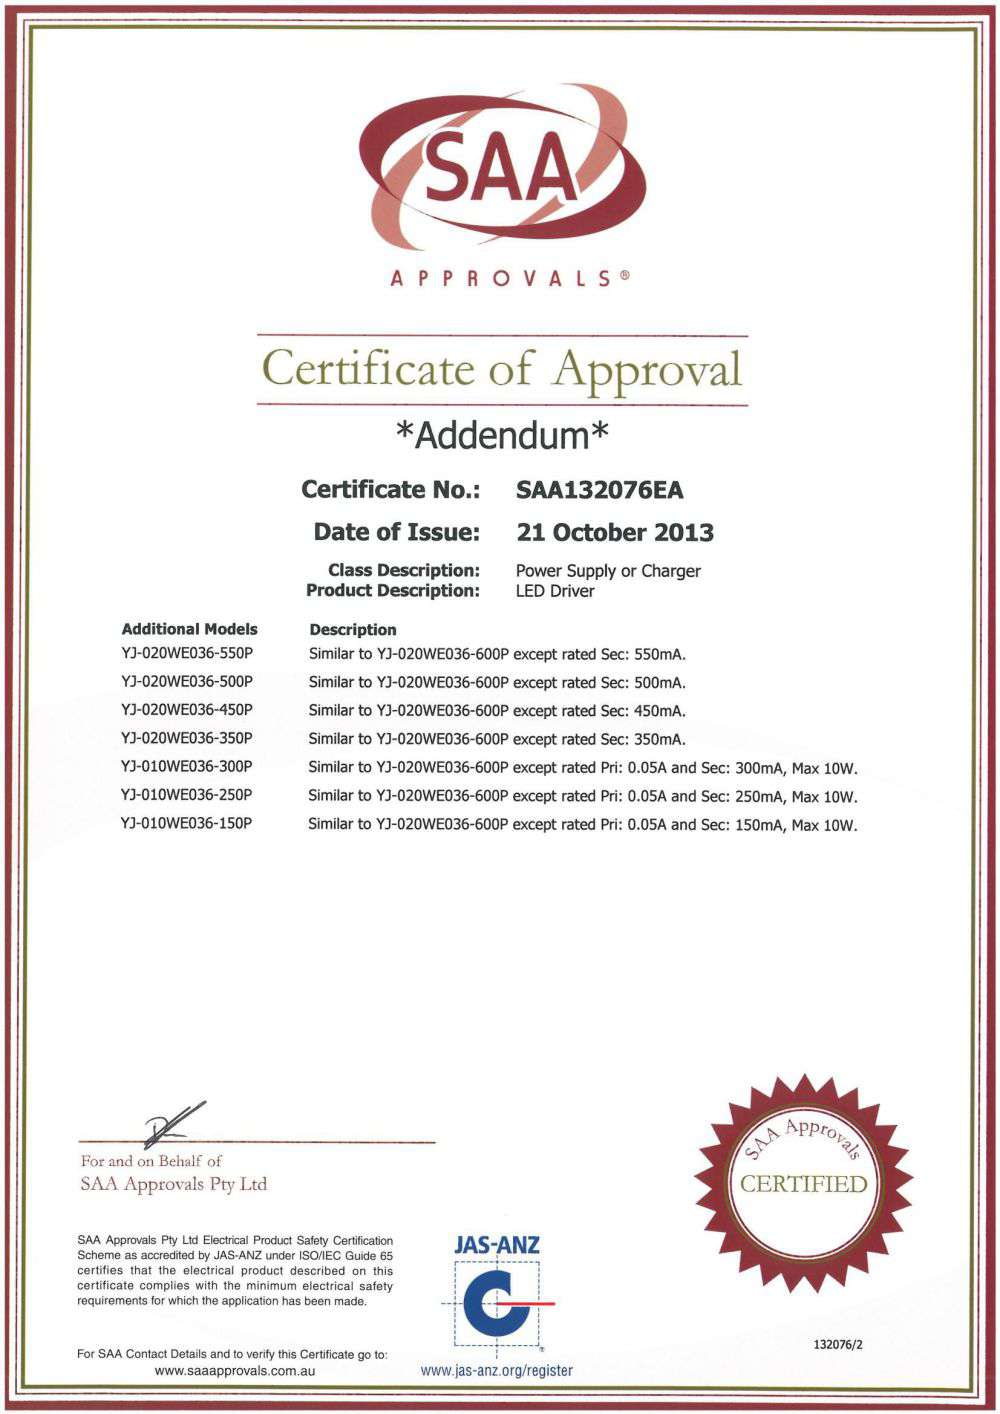 Aglare Lighing's products are certified by SAA in Australia